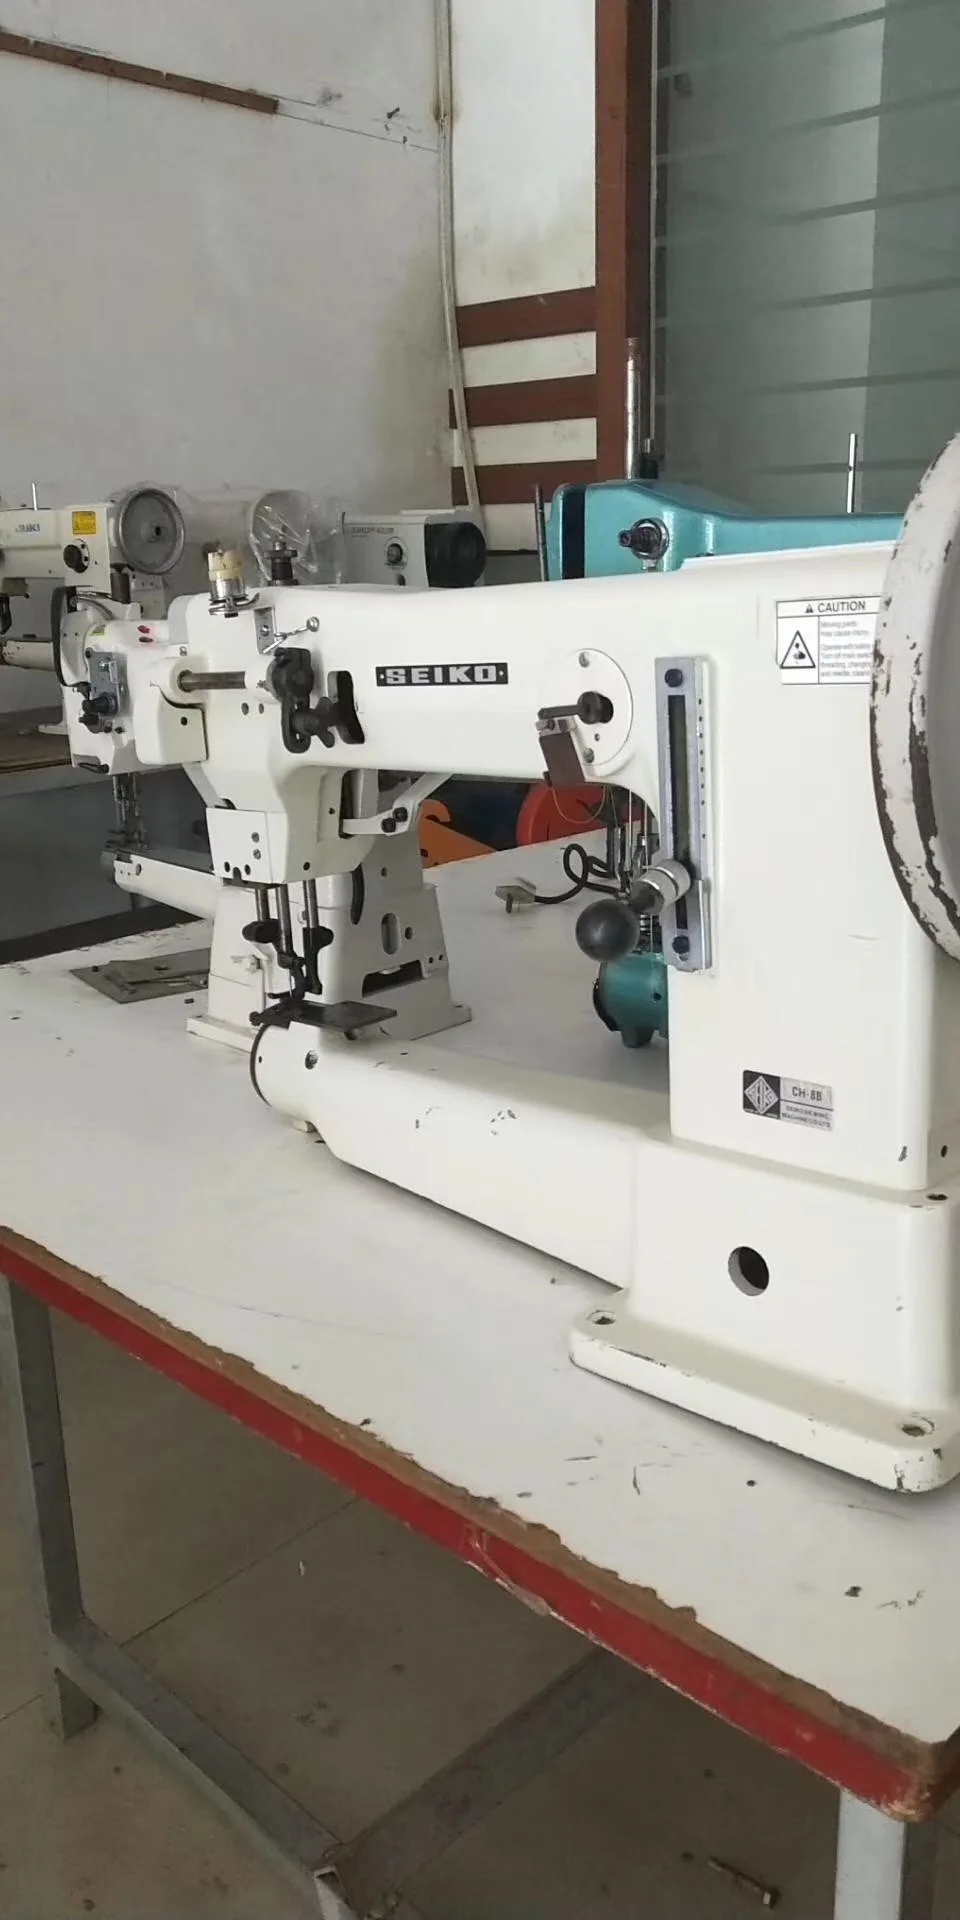 Japan Brand Seiko 441 Used Industrial Sewing Machine Thick Thread Sewing  Machine - Buy Seiko Sewing Machines,Secondhand Used Seiko Sewing Machines,Thick  Thread Sewing Machine Product on 